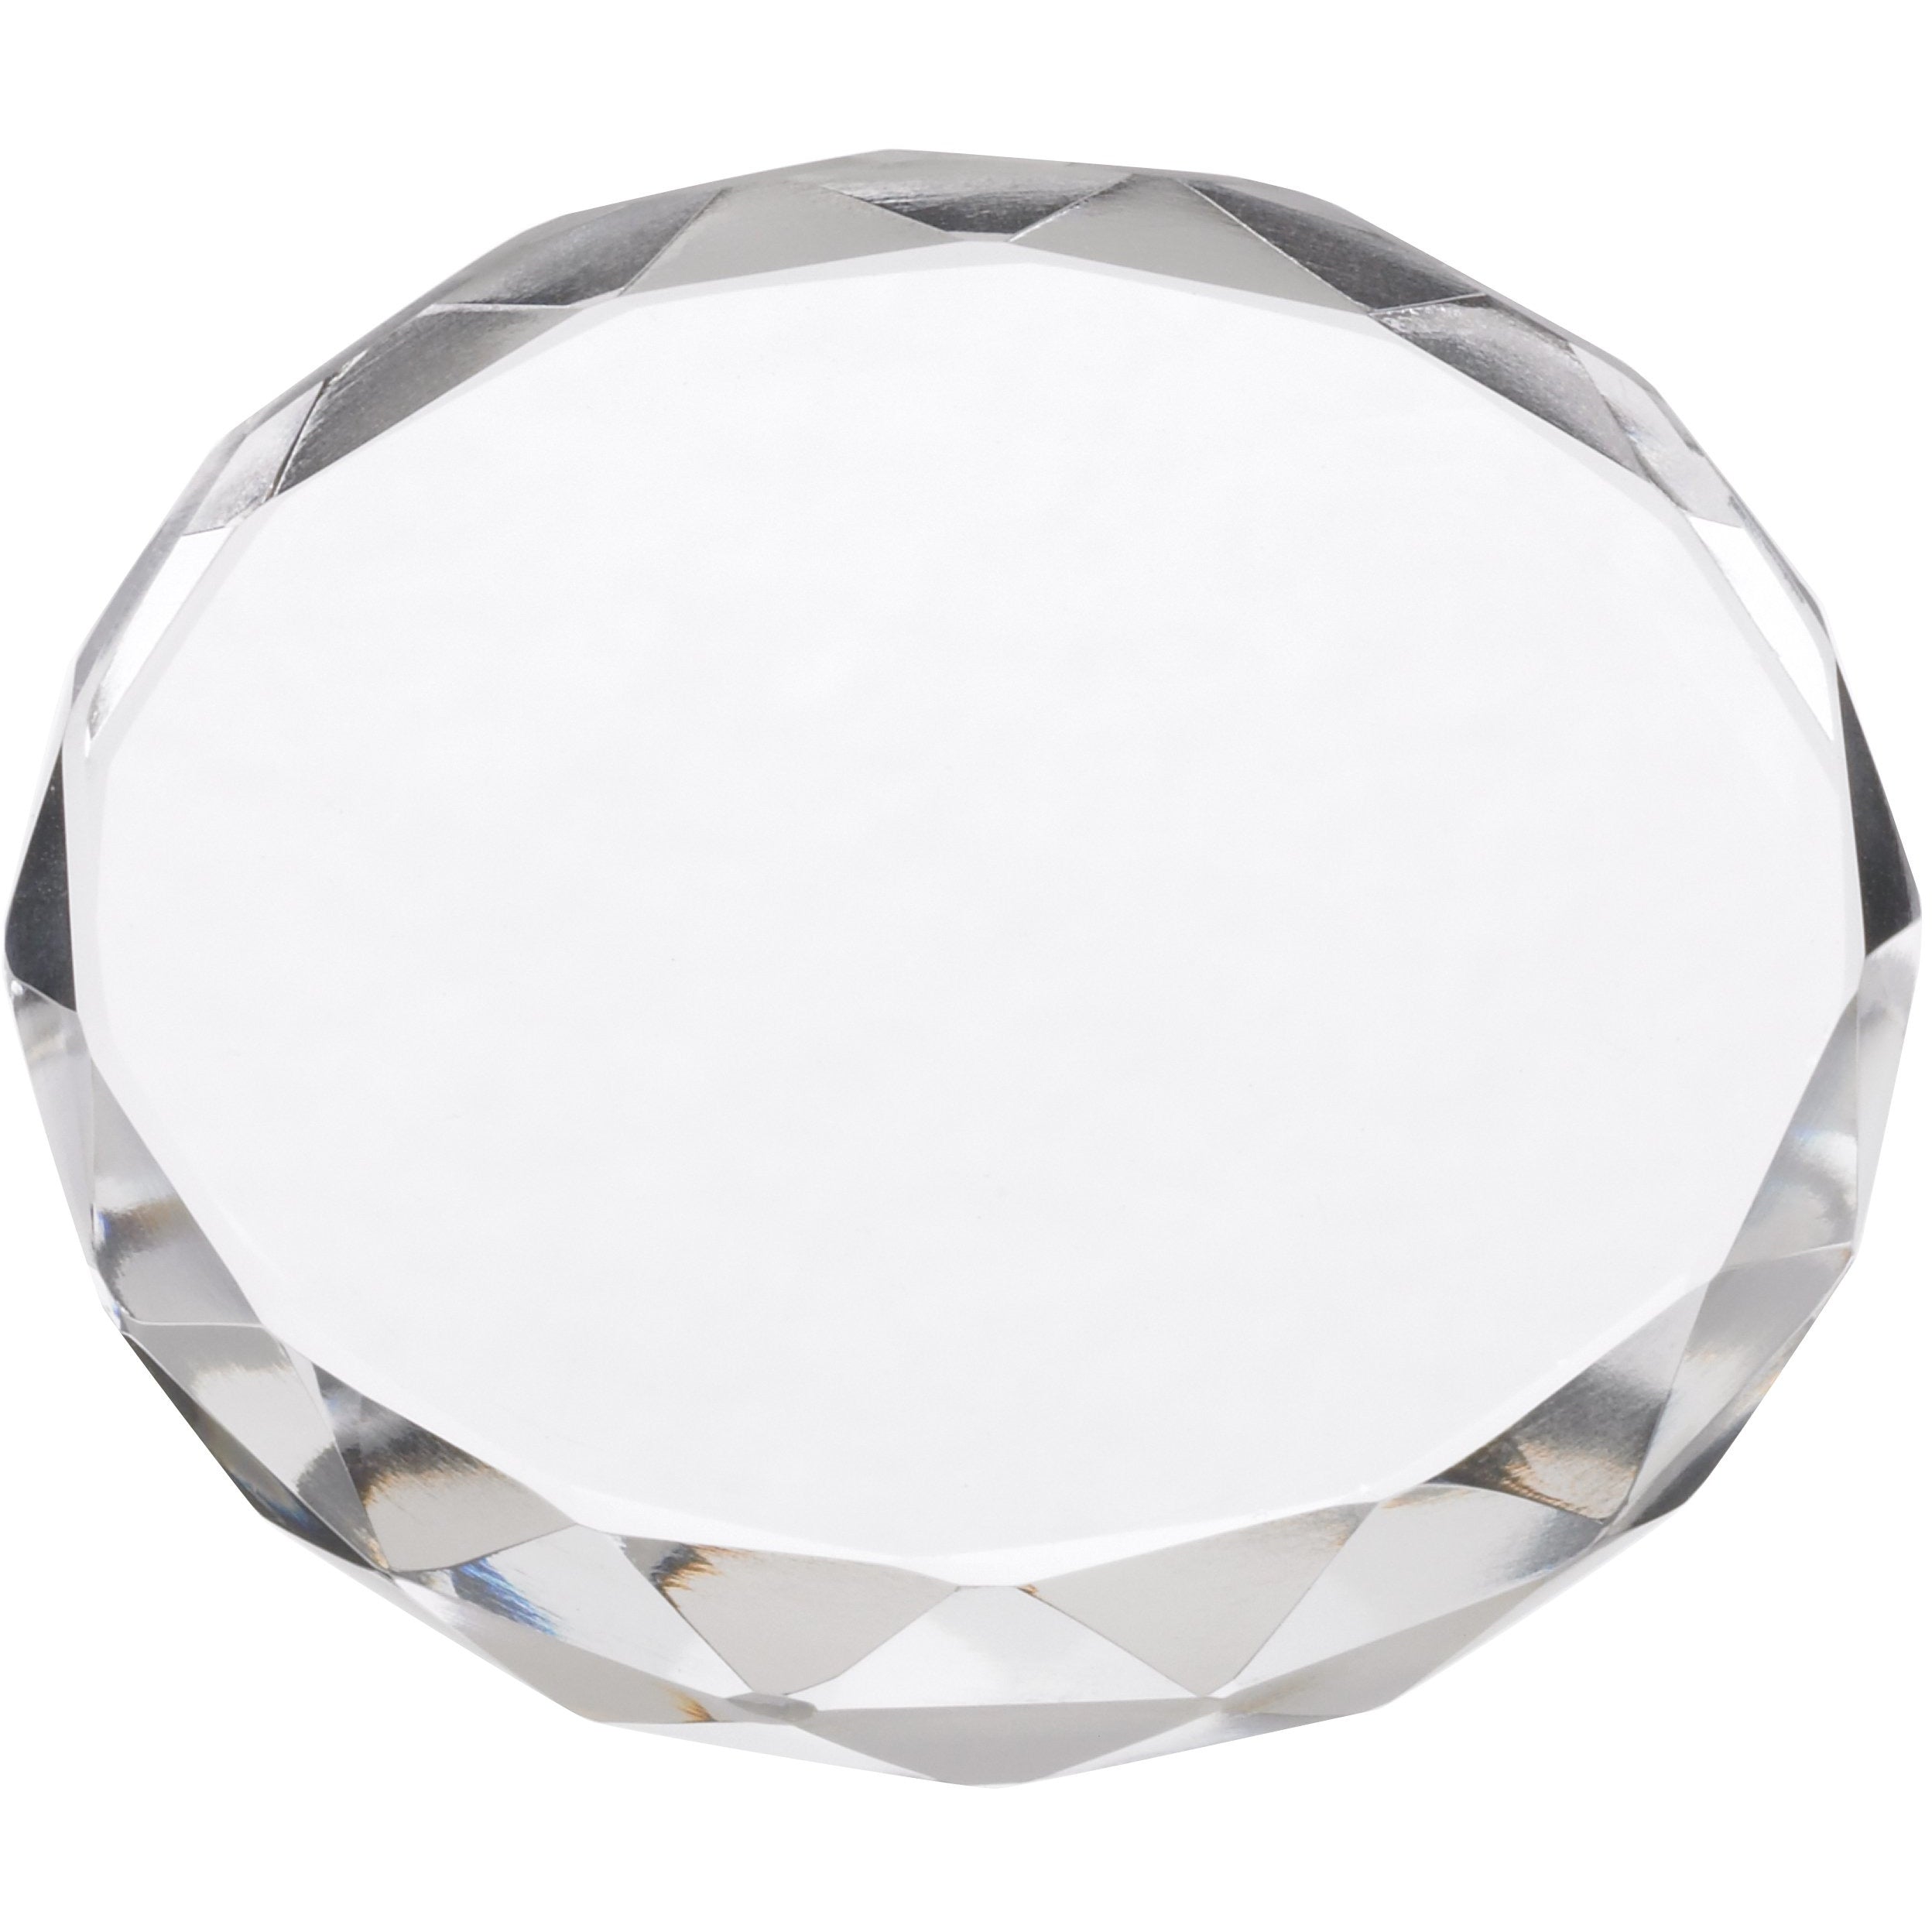 Engraved Round Glass Facet Edge Paperweight